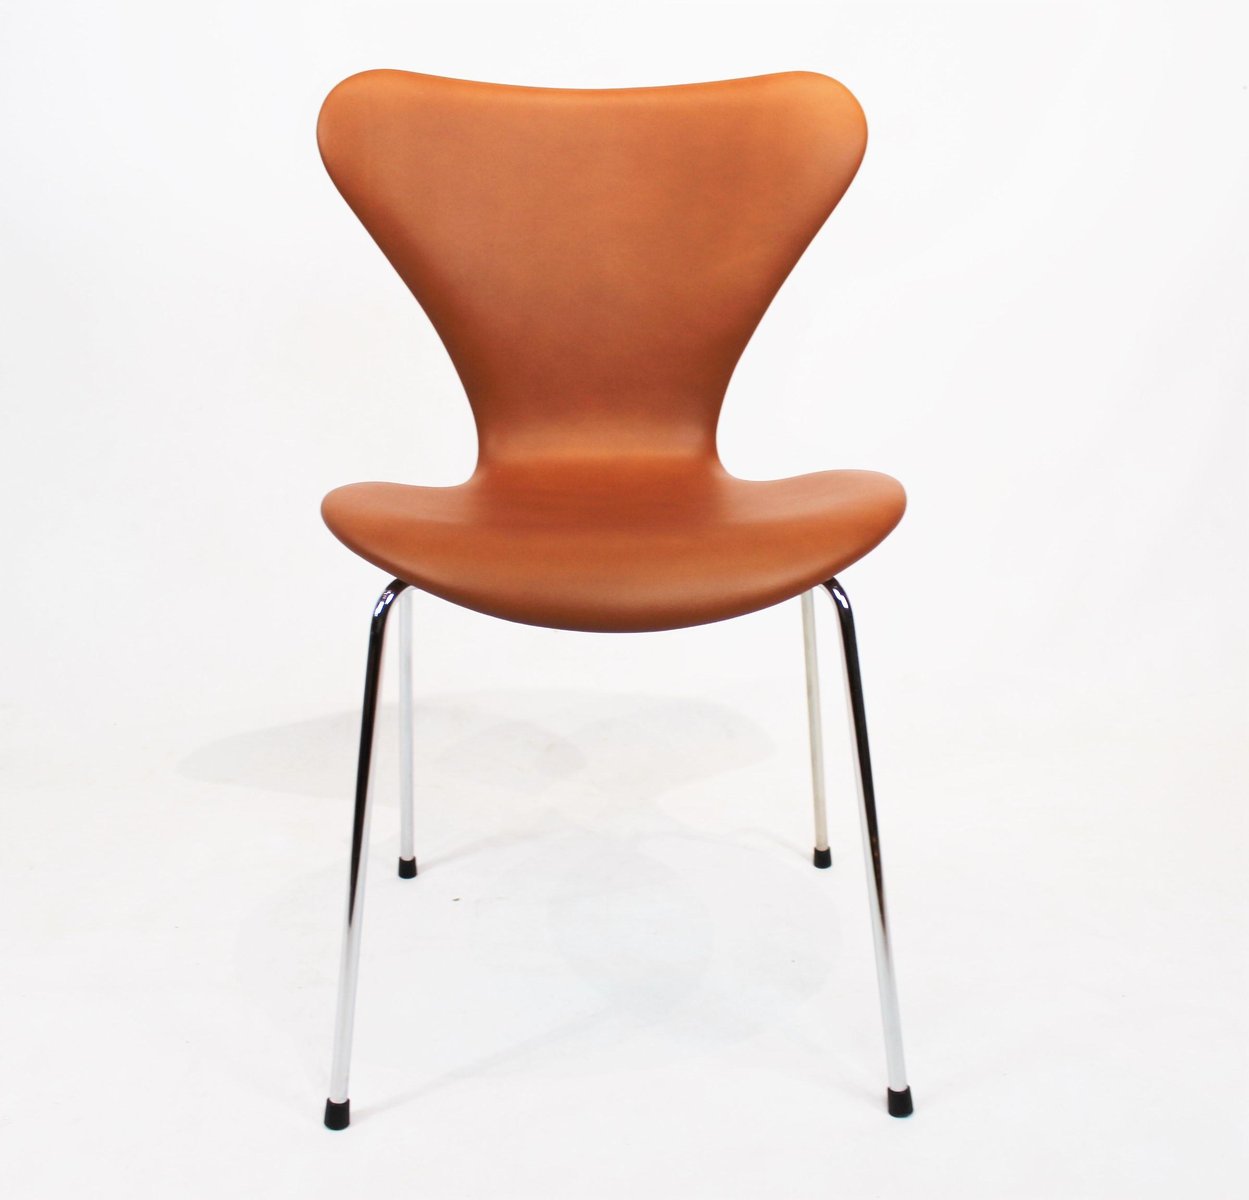 cognac leather model 3107 dining chairs by arne jacobsen for fritz hansen 1980s set of 4 UY-570013